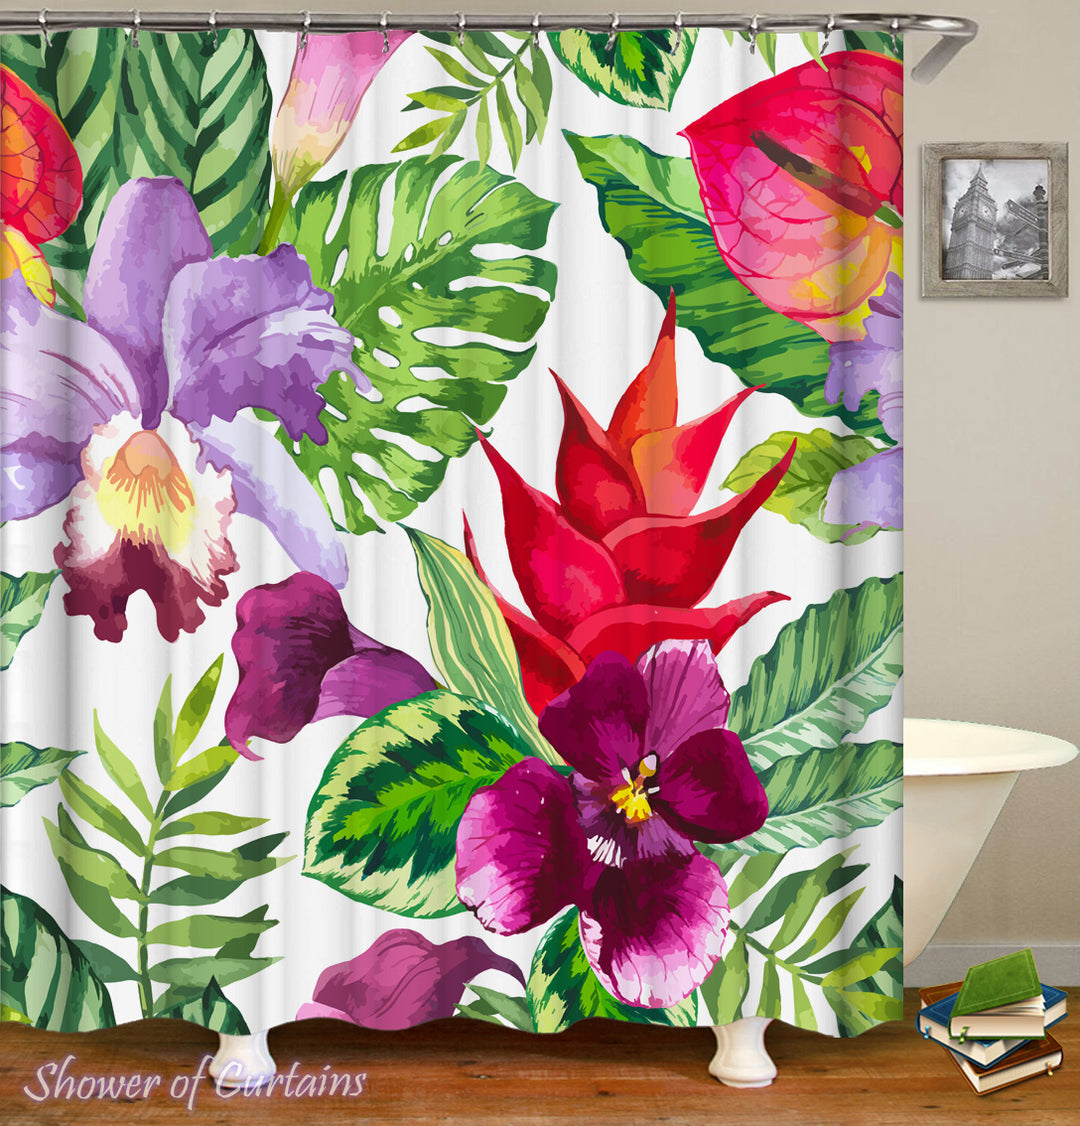 Tropical Shower Curtains - Colorful Tropical Flowers